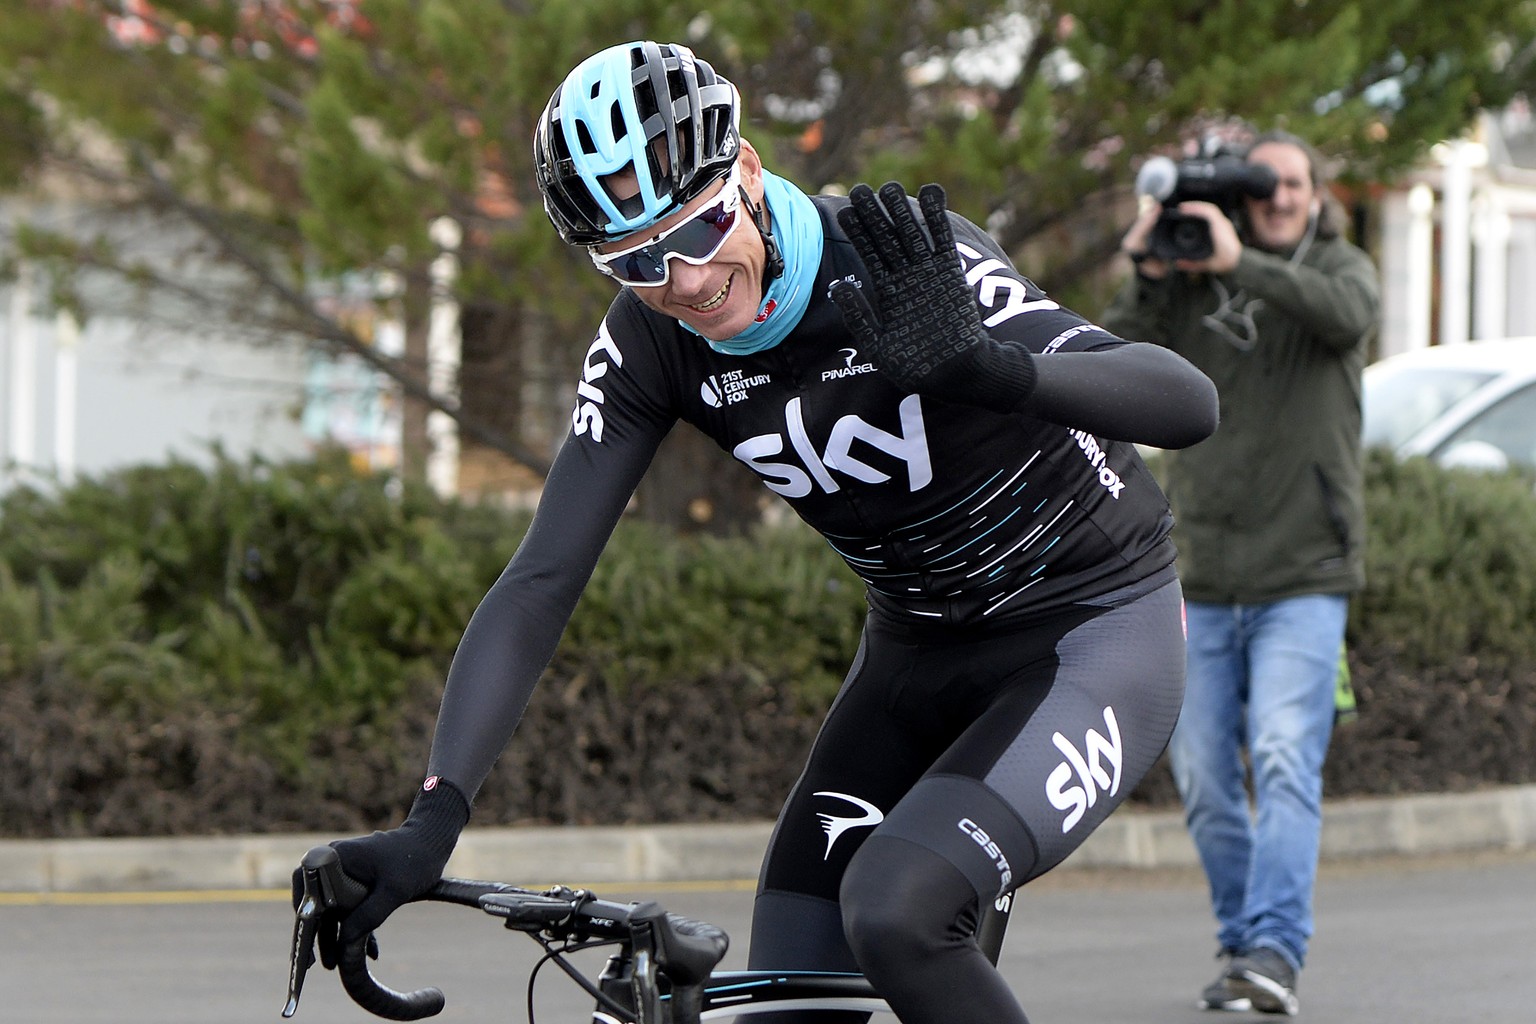 Four-time Tour de France champion Chris Froome of Britain waves while training in Palma de Mallorca, Balearic island of Mallorca, Spain, Thursday Dec. 14, 2017. Froome says a &quot;wealth of informati ...